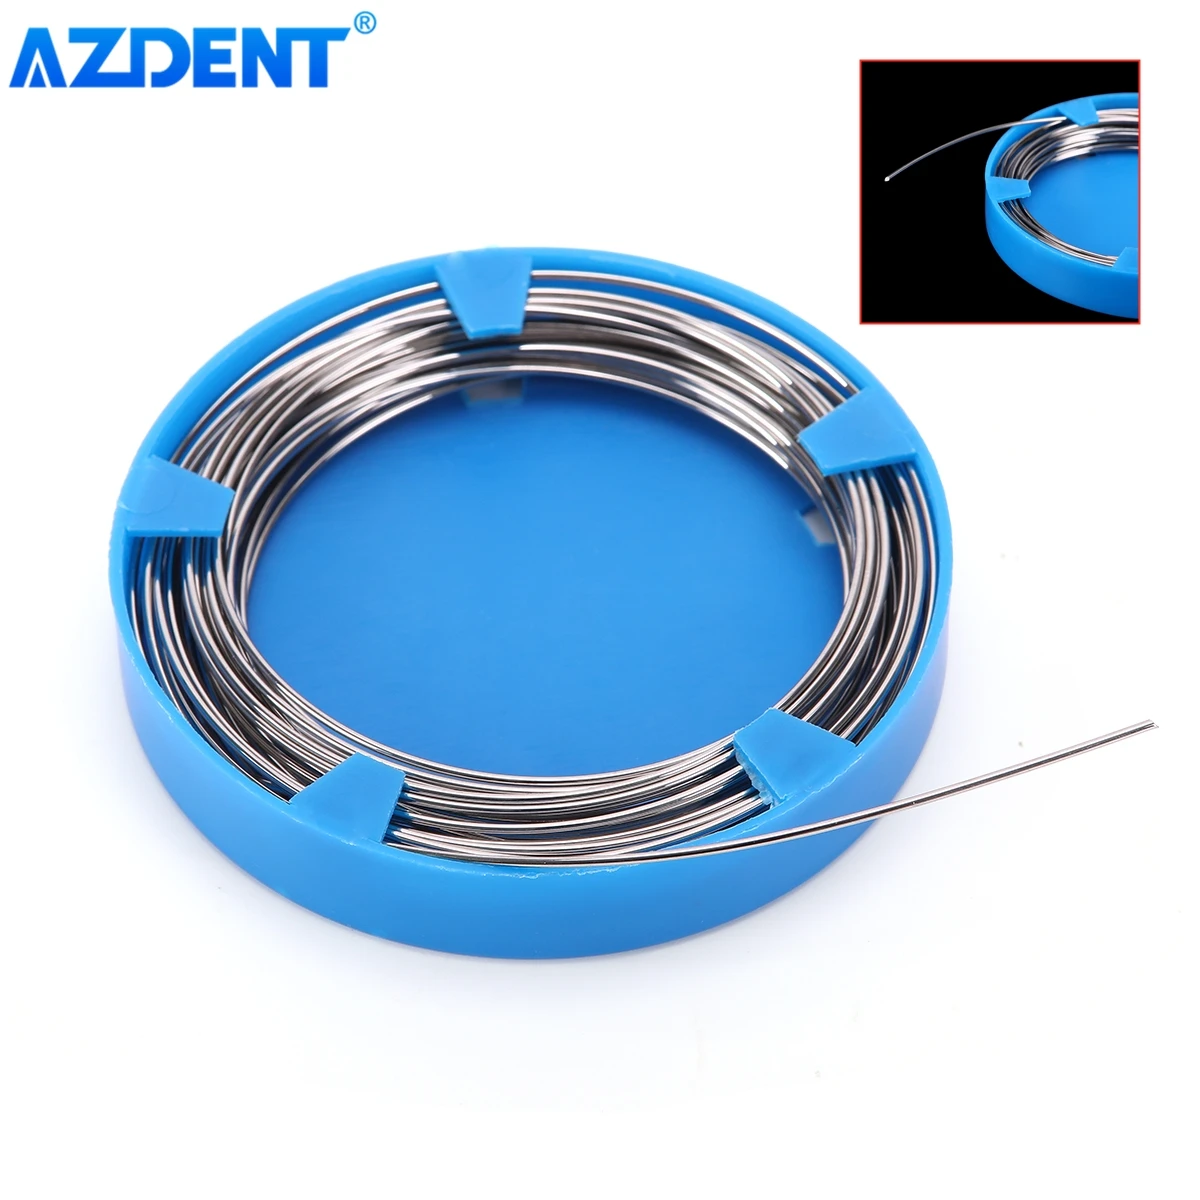 

50g/Box AZDENT Dental Orthodontic Stainless Steel Arch Wire Size 0.5/0.6/0.7/0.8/0.9/1.0mm about 9.5m Dentistry Tool Dentists